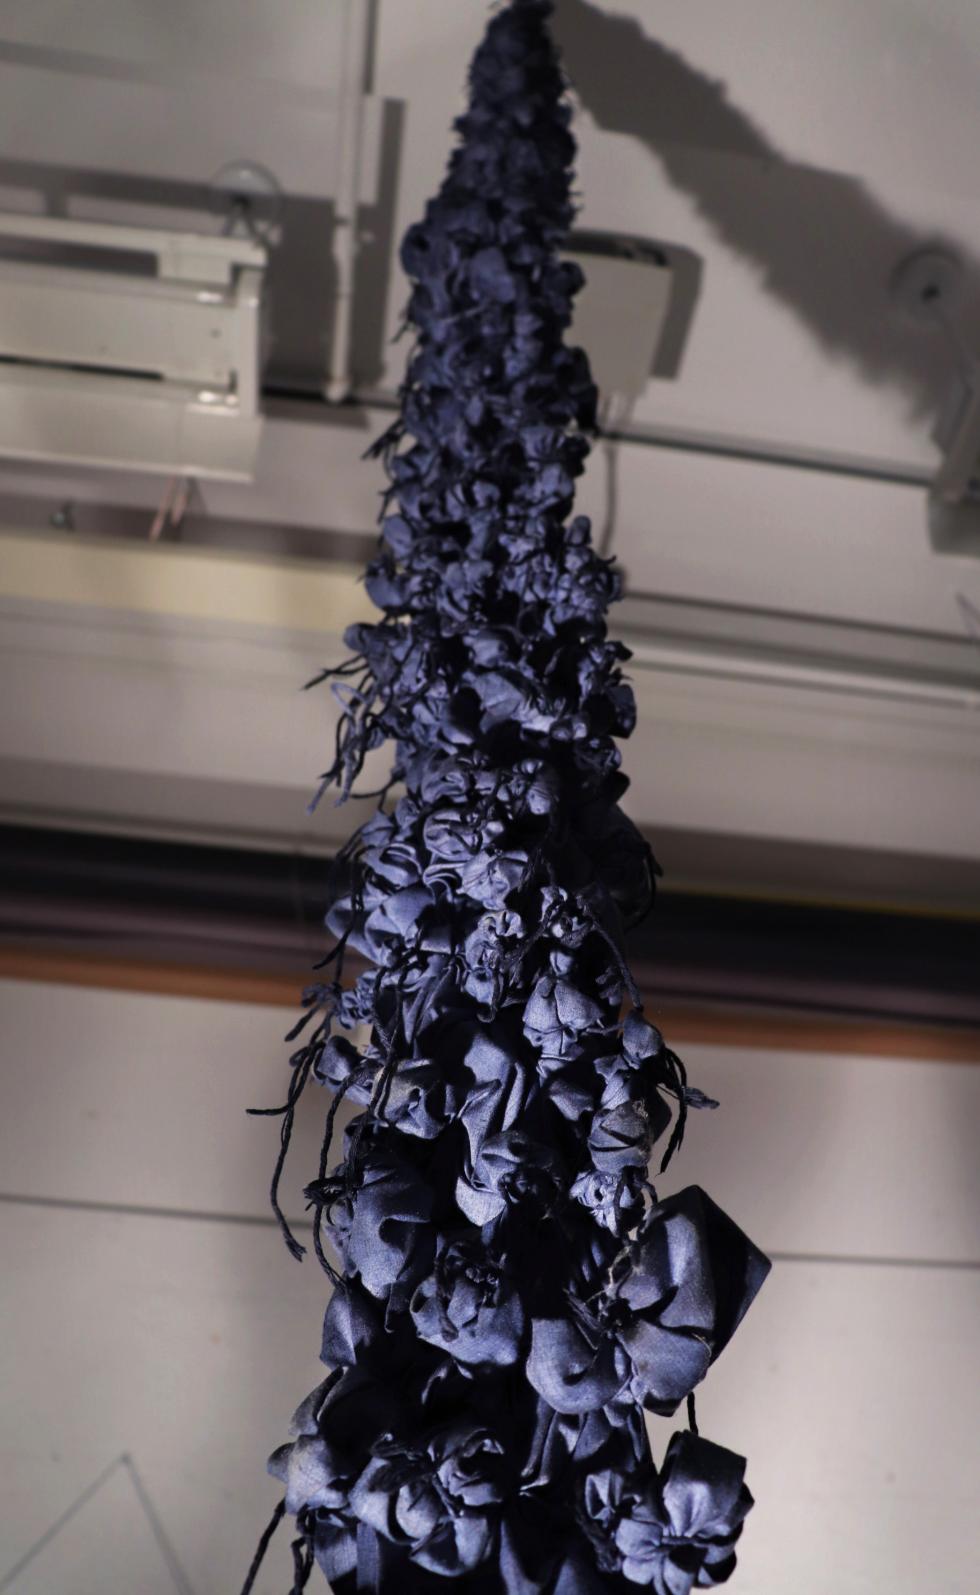 Pieces of dark purple cloth bound together with dark purple yarn in bunched up patterns hung from the ceiling.